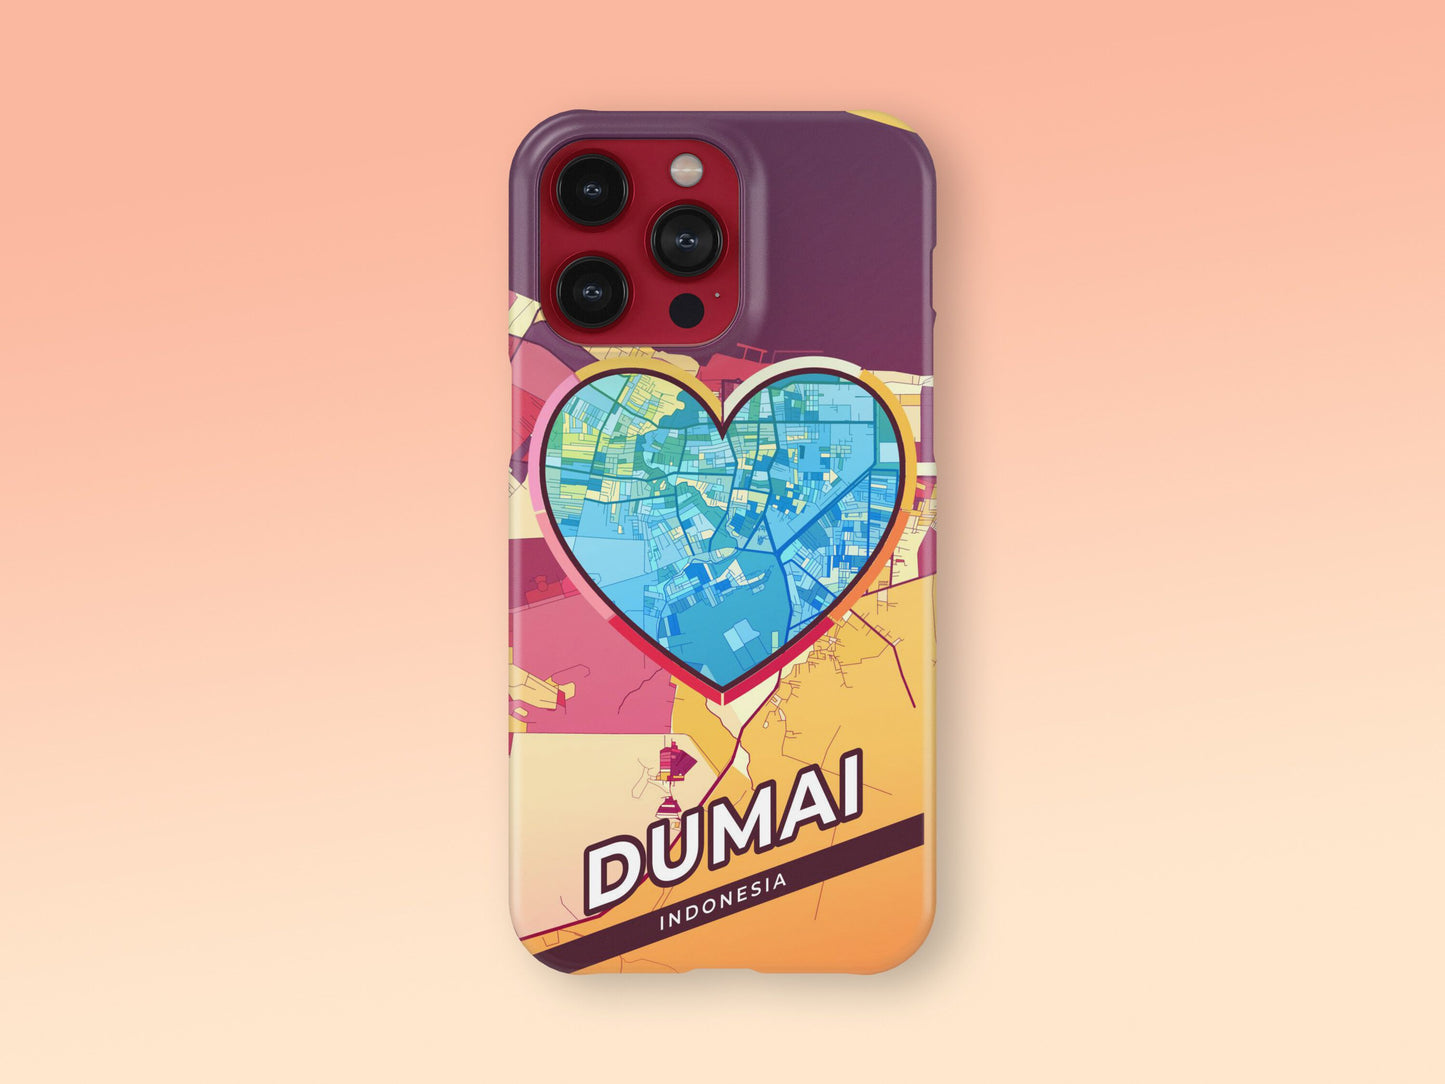 Dumai Indonesia slim phone case with colorful icon. Birthday, wedding or housewarming gift. Couple match cases. 2